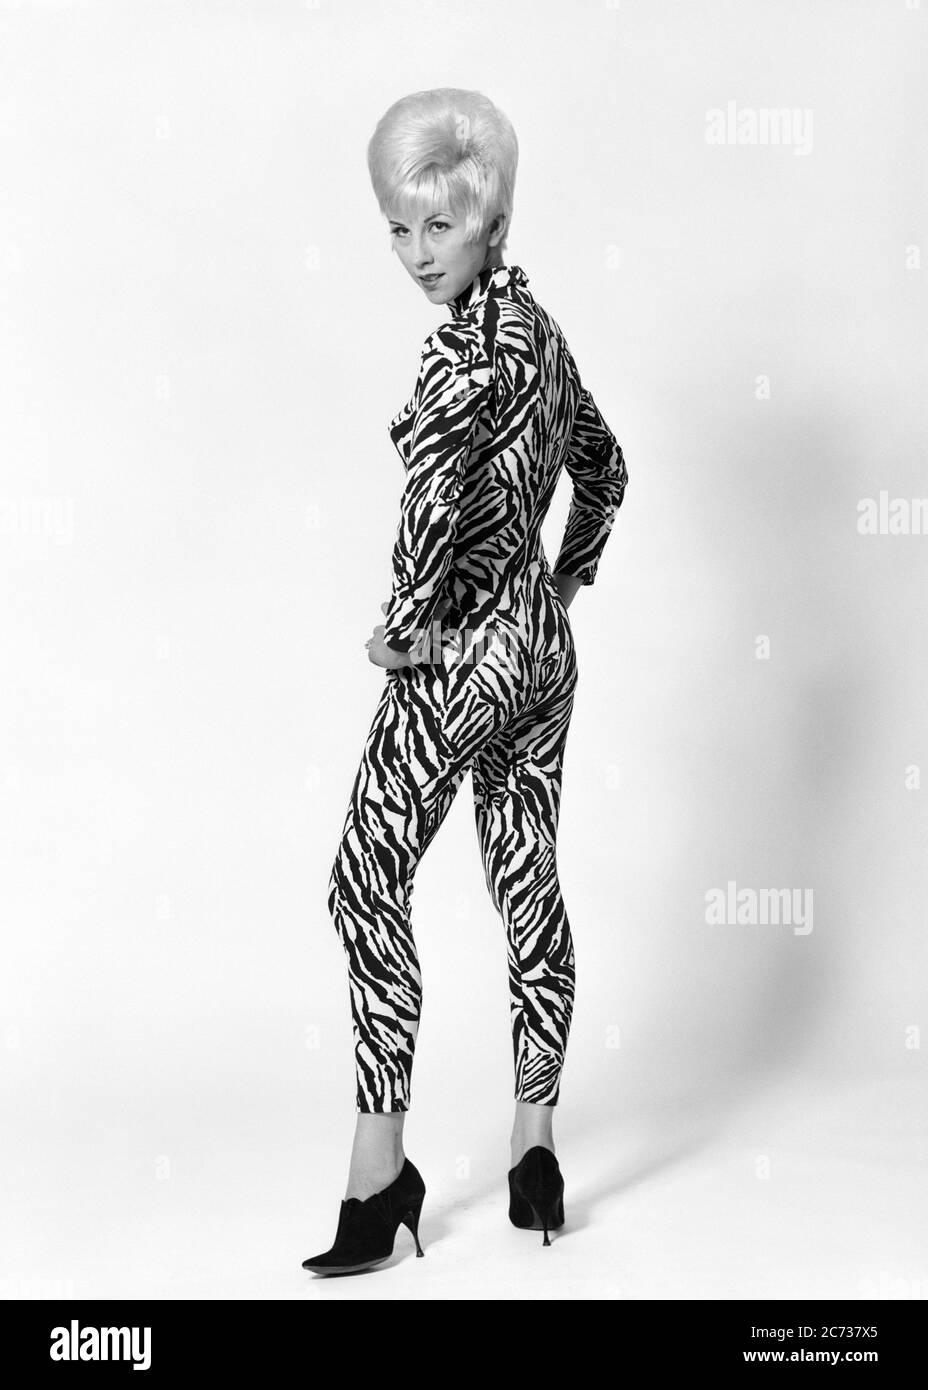 1960s BLONDE WOMAN BOUFFANT HAIRDO WEARING ANIMAL PRINT BODY SUIT POSING LOOKING OVER SHOULDER - asp jo7399 ASP001 HARS LIFESTYLE SATISFACTION CELEBRATION FEMALES STUDIO SHOT HEALTHINESS HOME LIFE COPY SPACE FULL-LENGTH LADIES PHYSICAL FITNESS PERSONS TRENDY ENTERTAINMENT CONFIDENCE B&W BEEHIVE EYE CONTACT TEMPTATION HUMOROUS HAPPINESS CHEERFUL HIP LEISURE STYLES FUNKY JUMPSUIT EXCITEMENT HAIRSTYLE COMICAL PRIDE REAR VIEW OCCUPATIONS POSING SMILES CONNECTION FROM BEHIND COMEDY JOYFUL STYLISH GROOVY MODELLING BACK VIEW FASHIONS HAIRDO MID-ADULT MID-ADULT WOMAN MODELING POSE TEASED Stock Photo